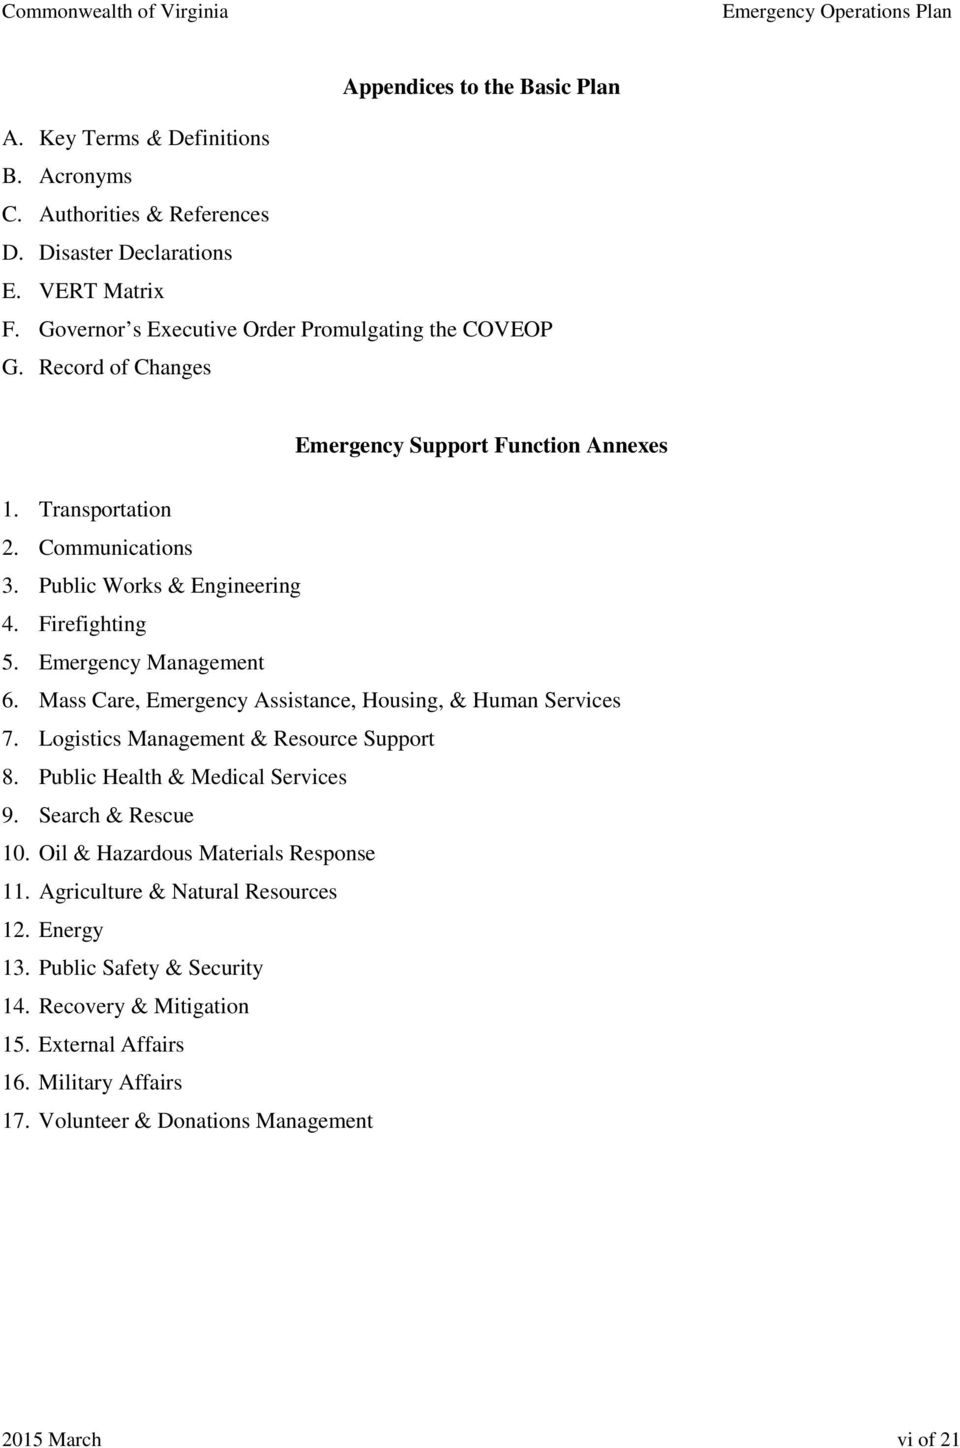 Emergency Management 6. Mass Care, Emergency Assistance, Housing, & Human Services 7. Logistics Management & Resource Support 8. Public Health & Medical Services 9. Search & Rescue 10.